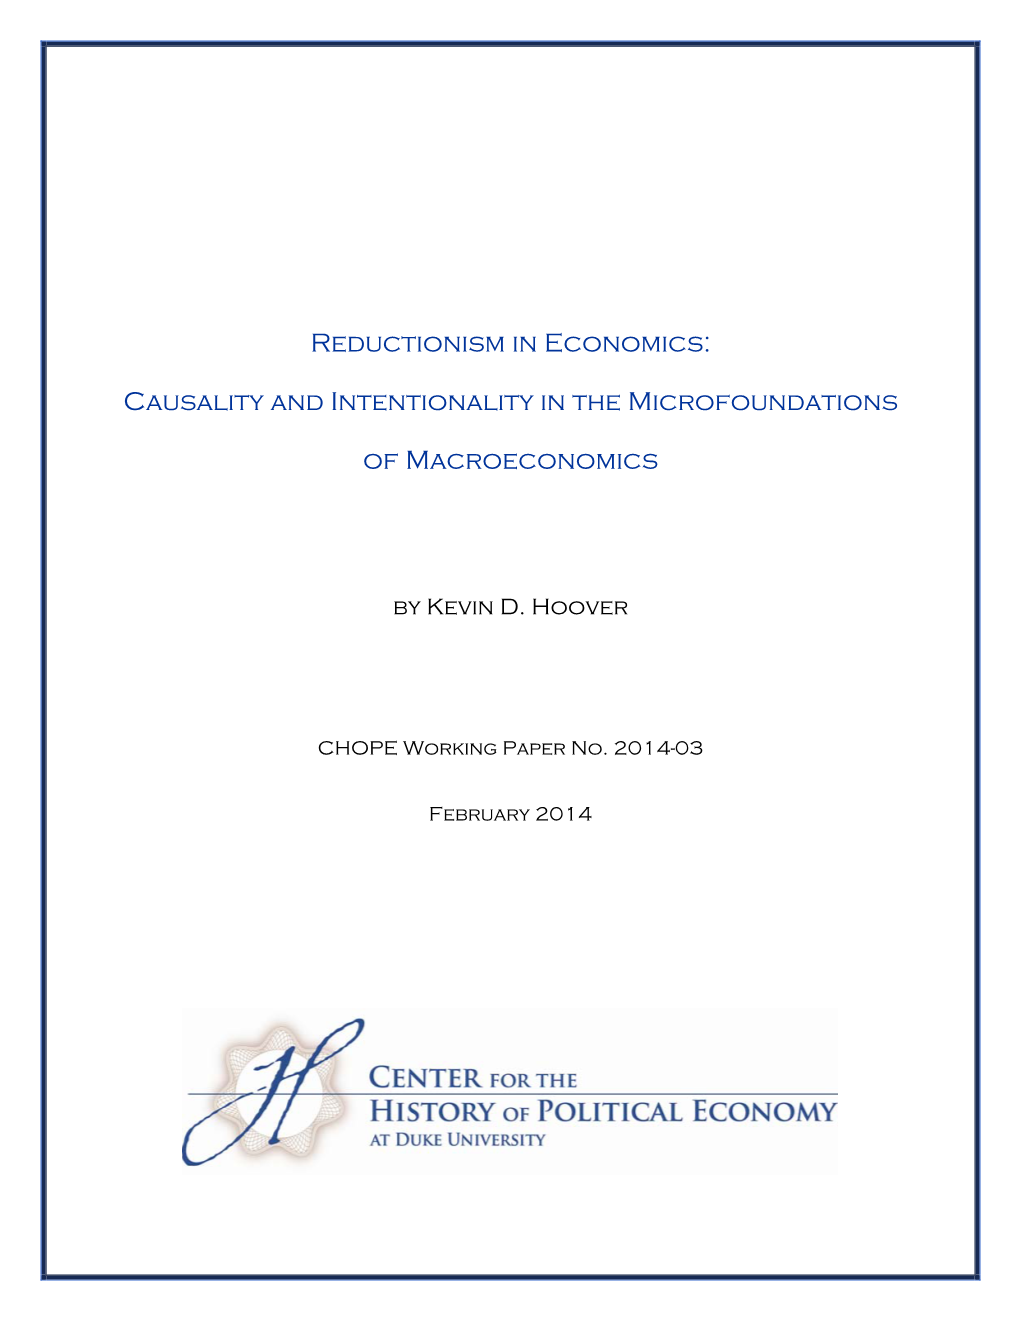 Reductionism in Economics: Causality and Intentionality in the Microfoundations of Macroeconomics*